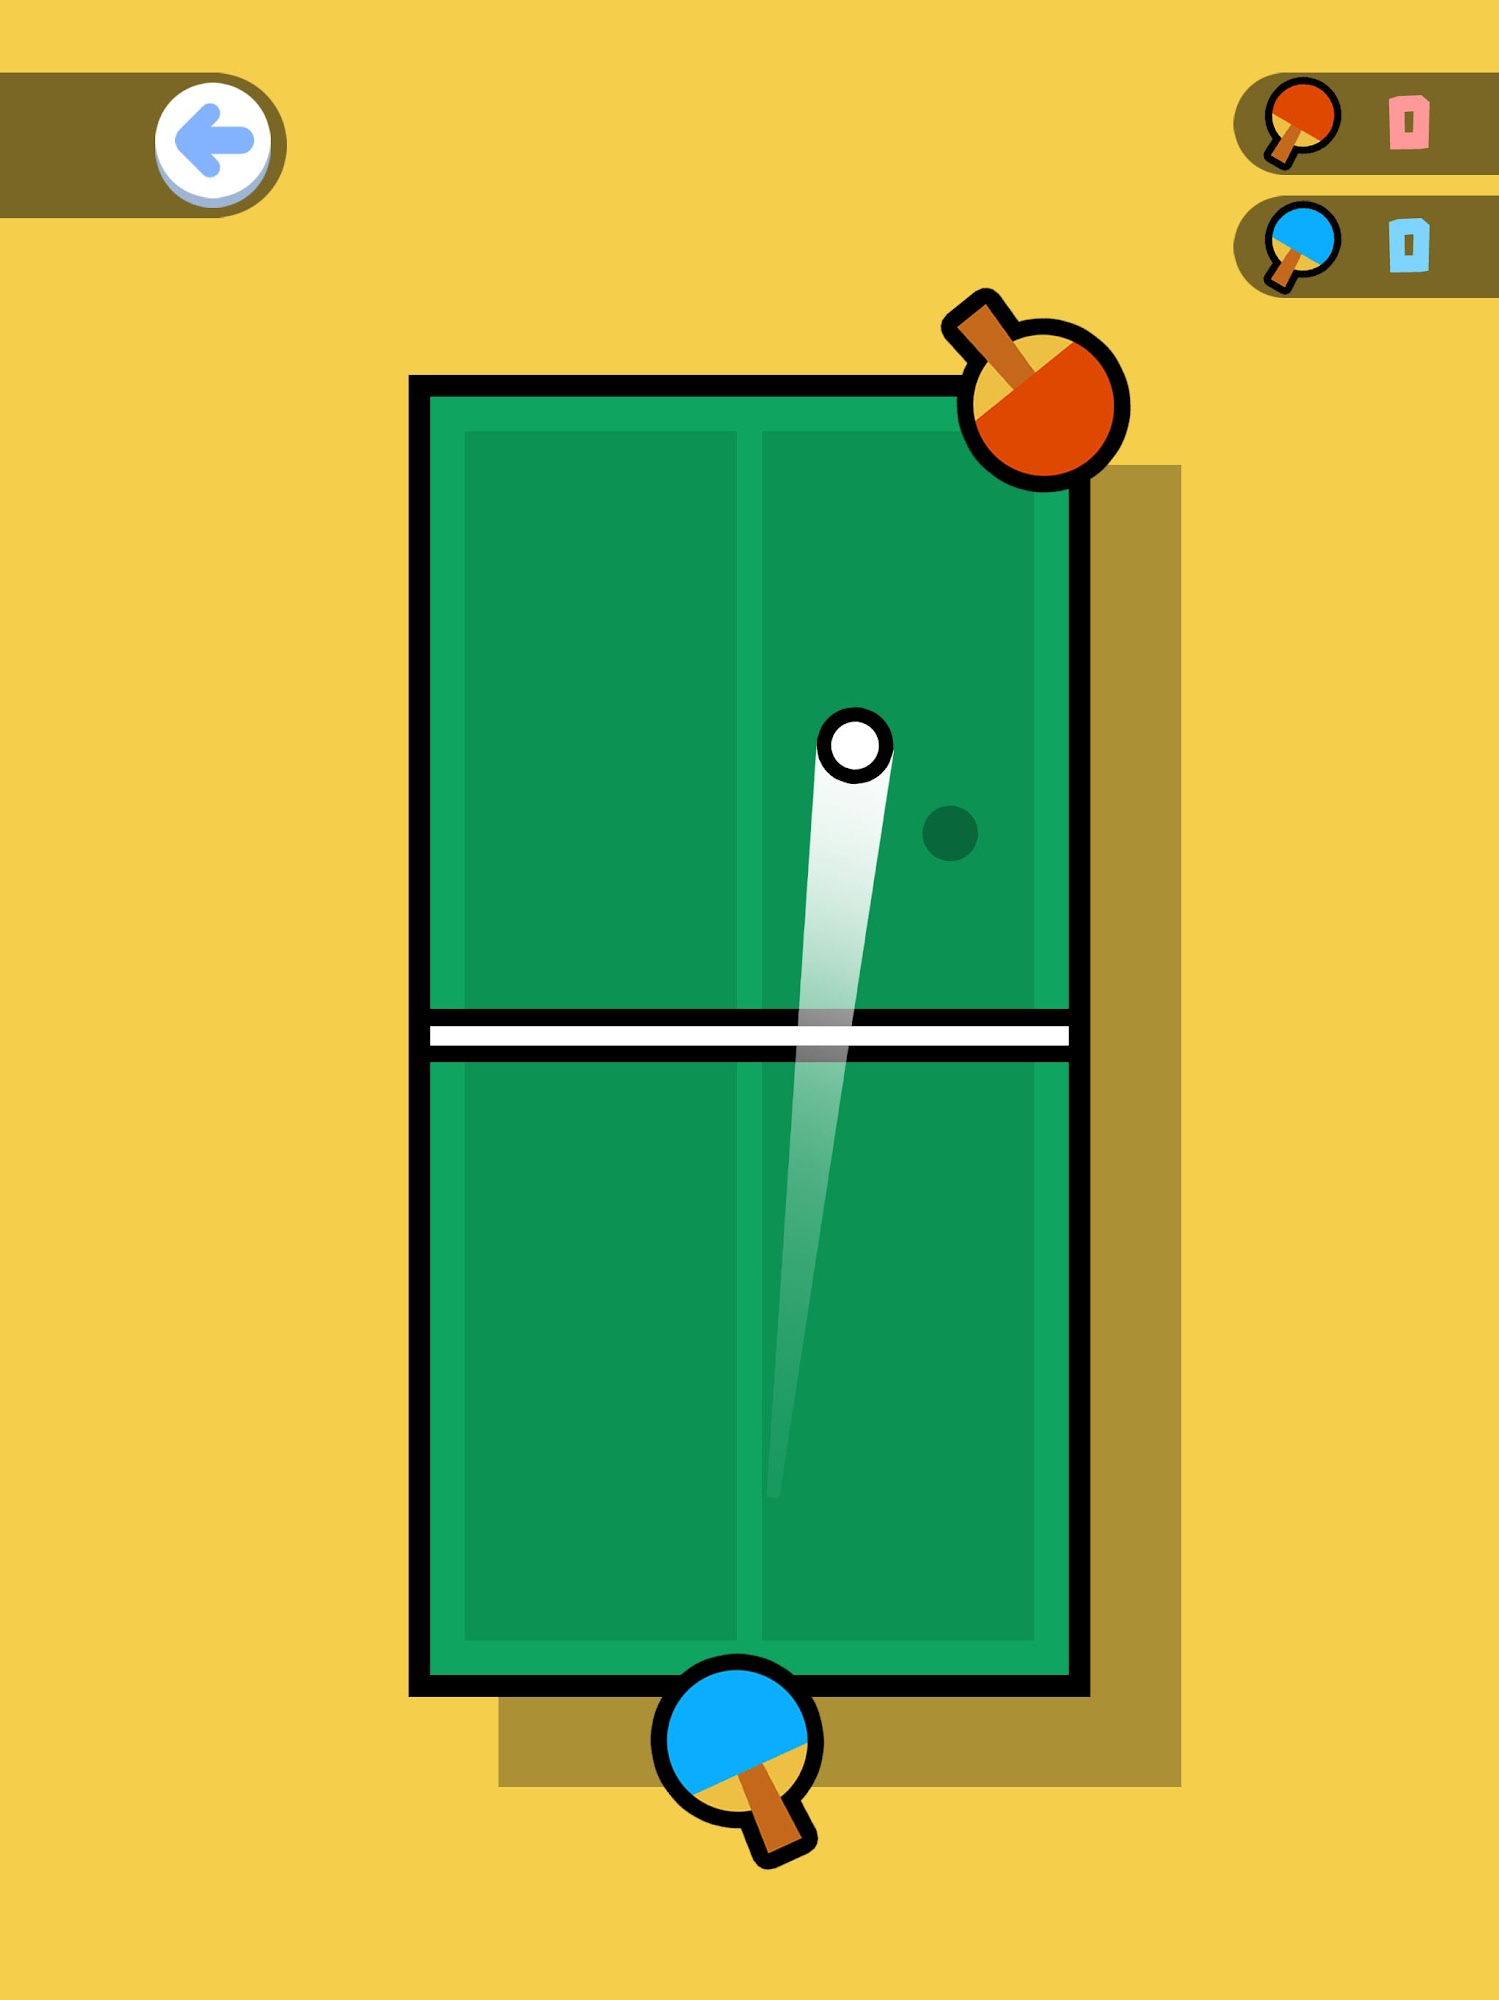 Battle Table Tennis - Android game screenshots.